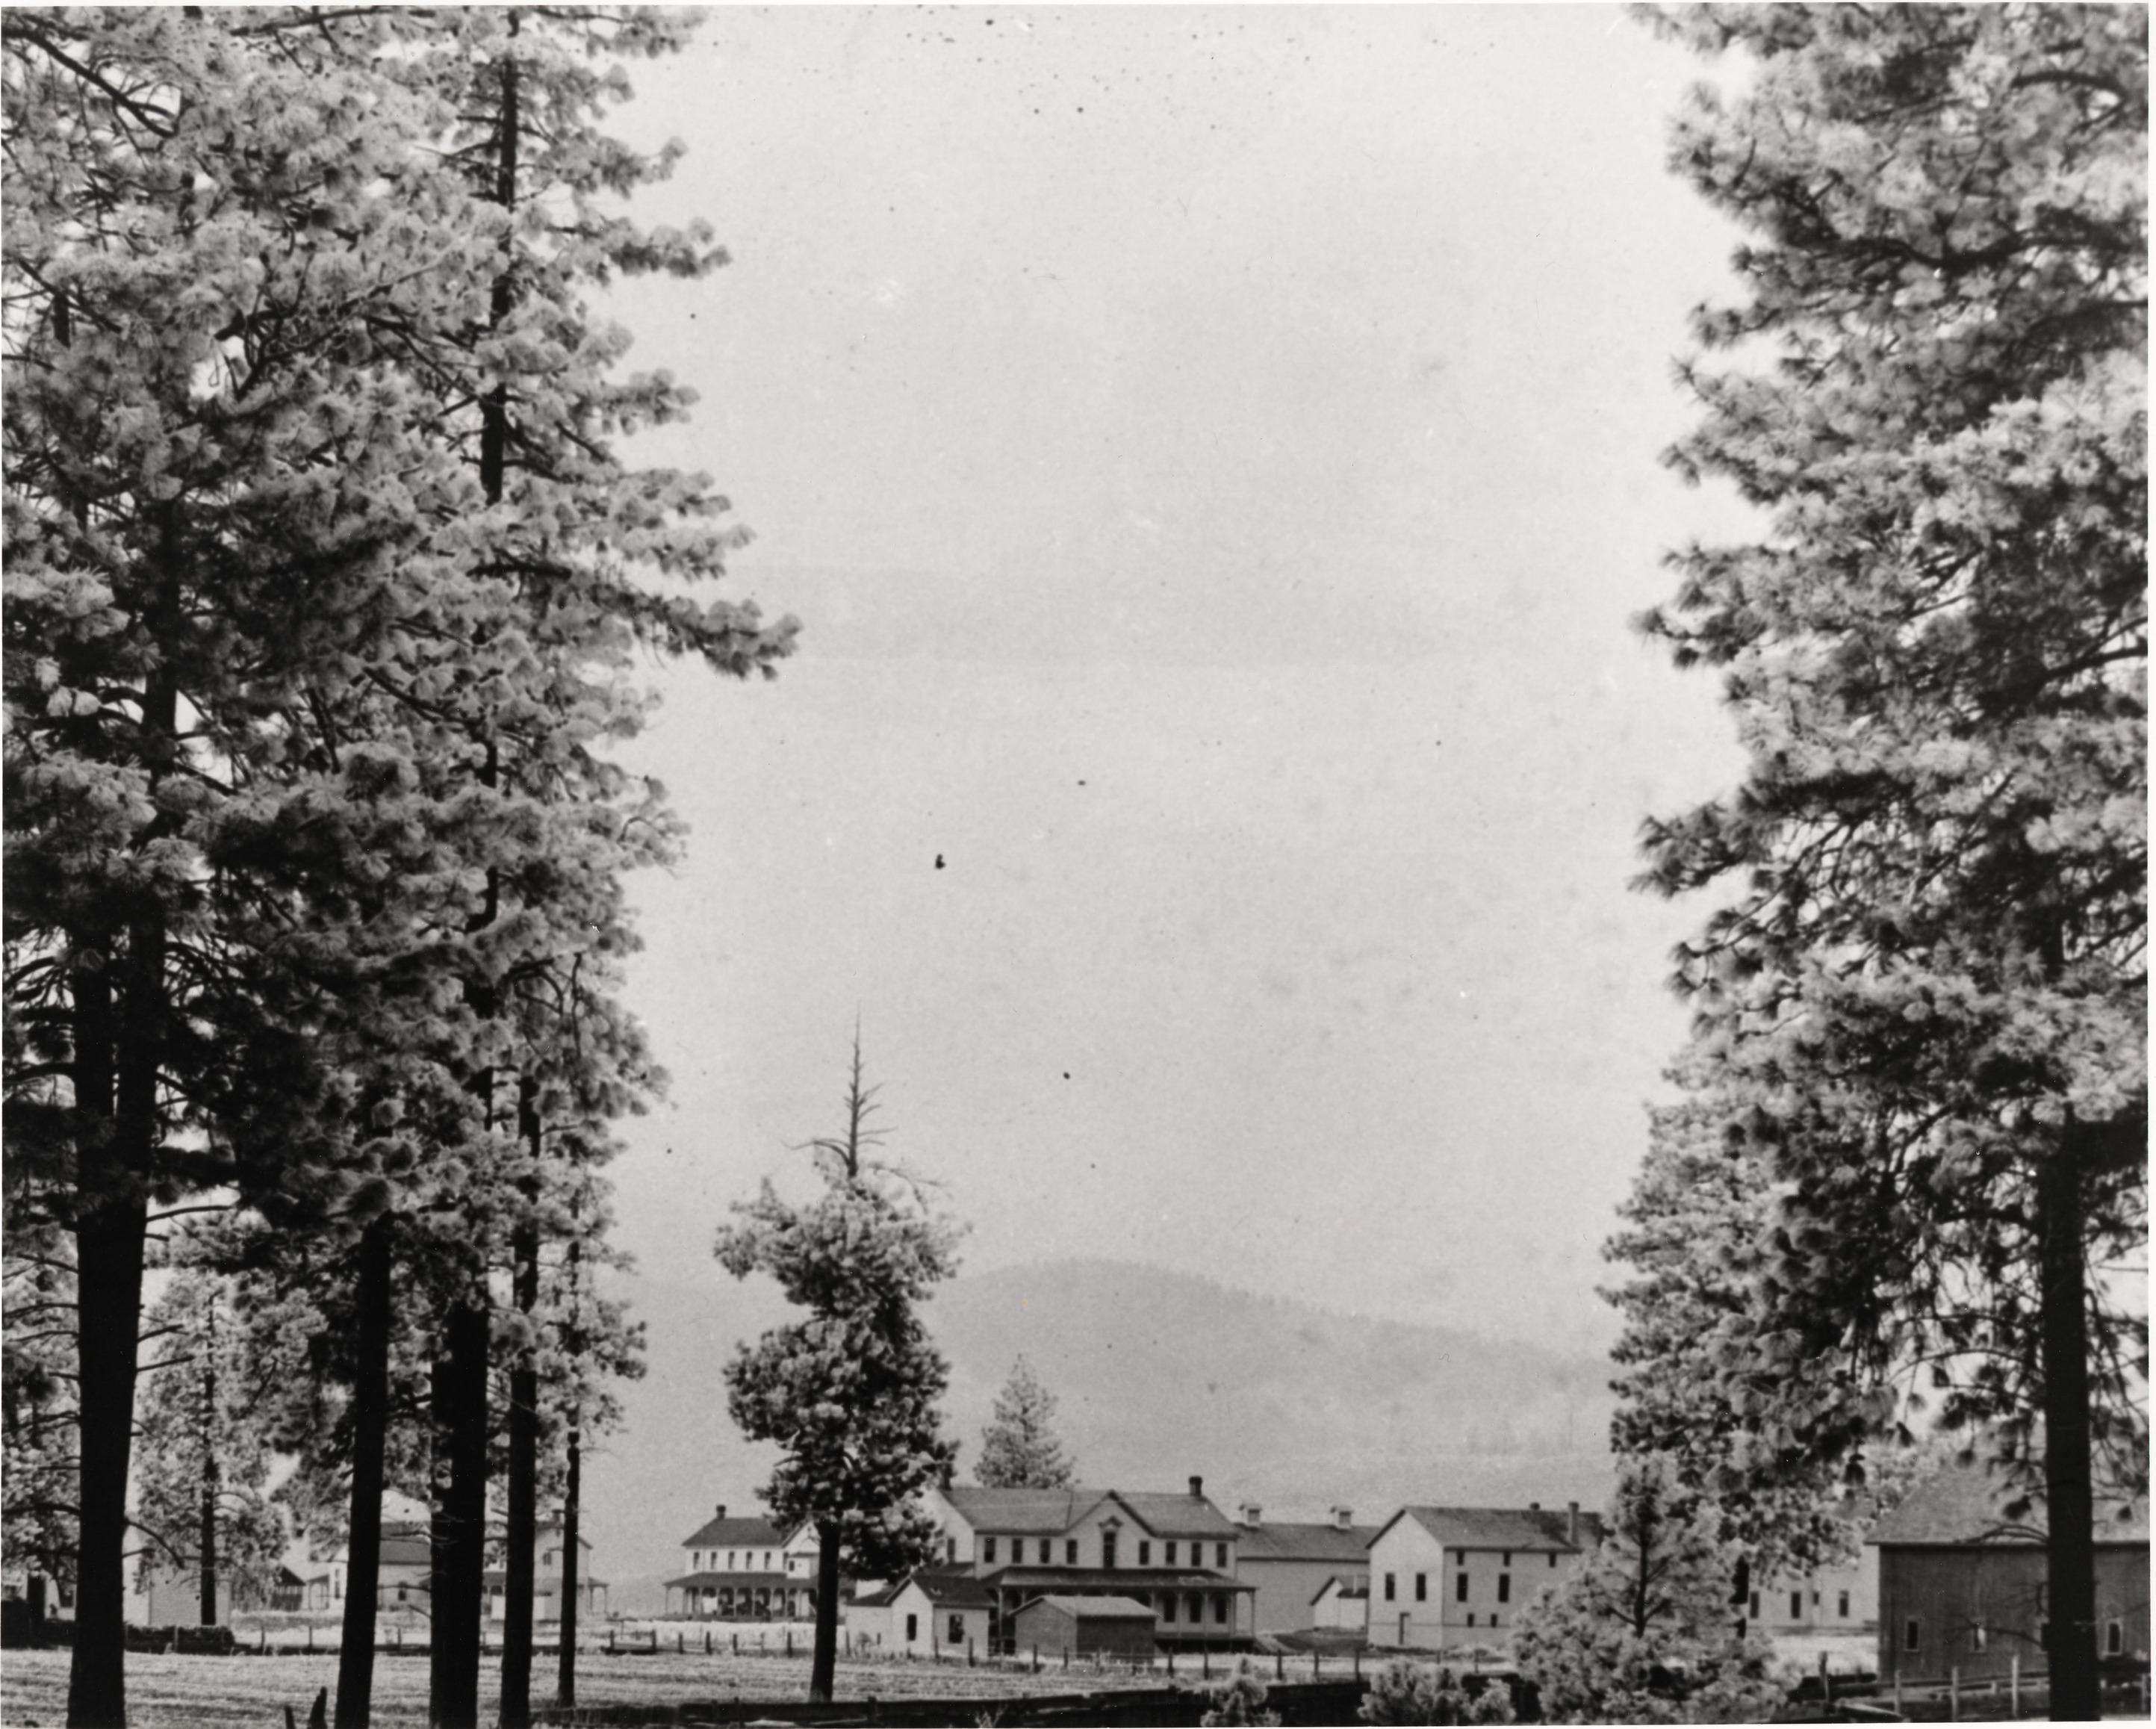 Black and white photograph of several wooden buildings viewed through tall pine tress